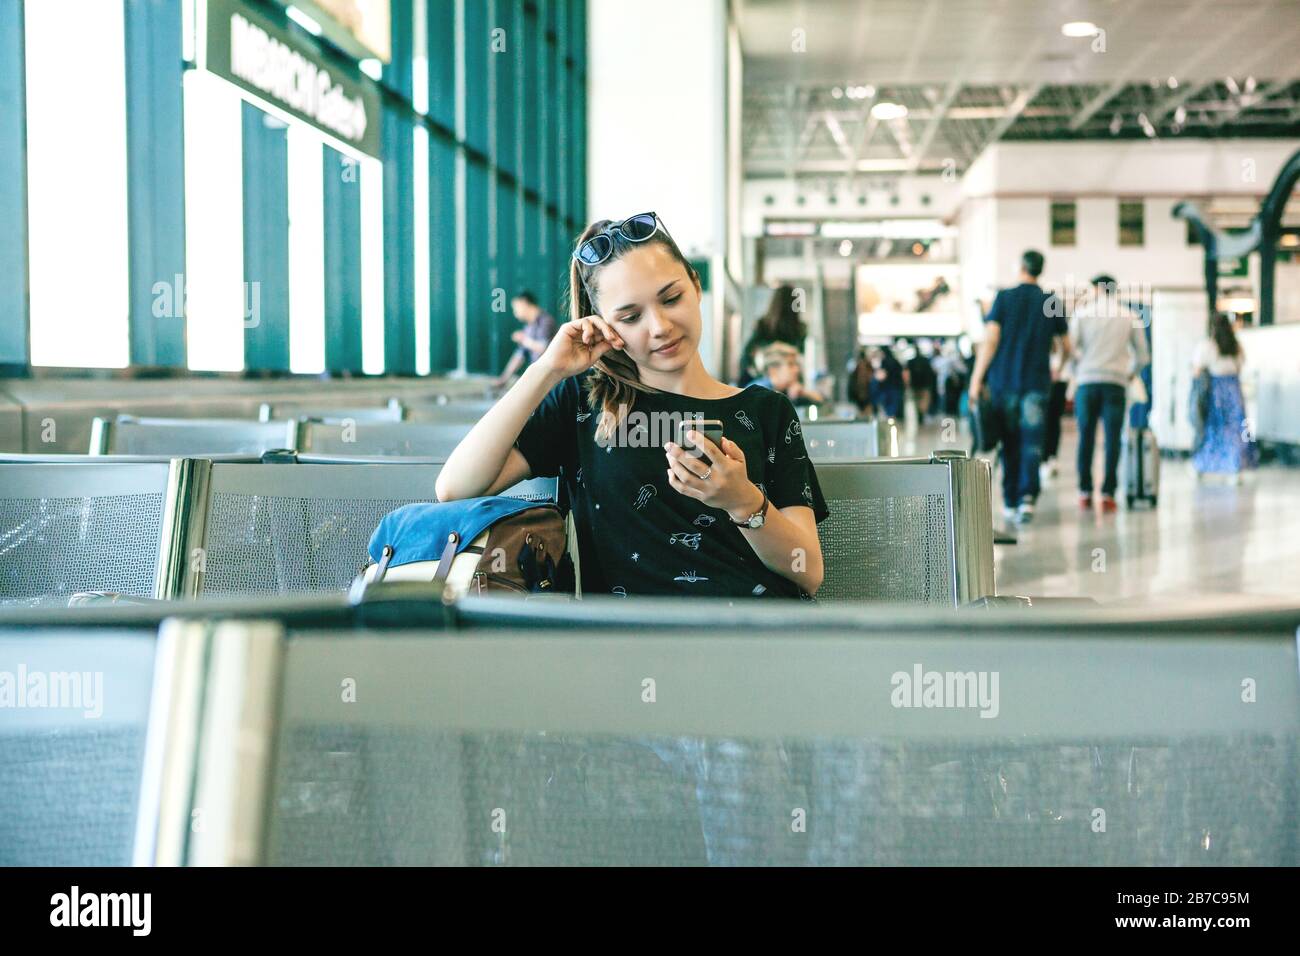 A tourist or student is waiting for a boarding announcement at a Milan airport in Italy to leave the country. She uses the phone, reads messages, or w Stock Photo